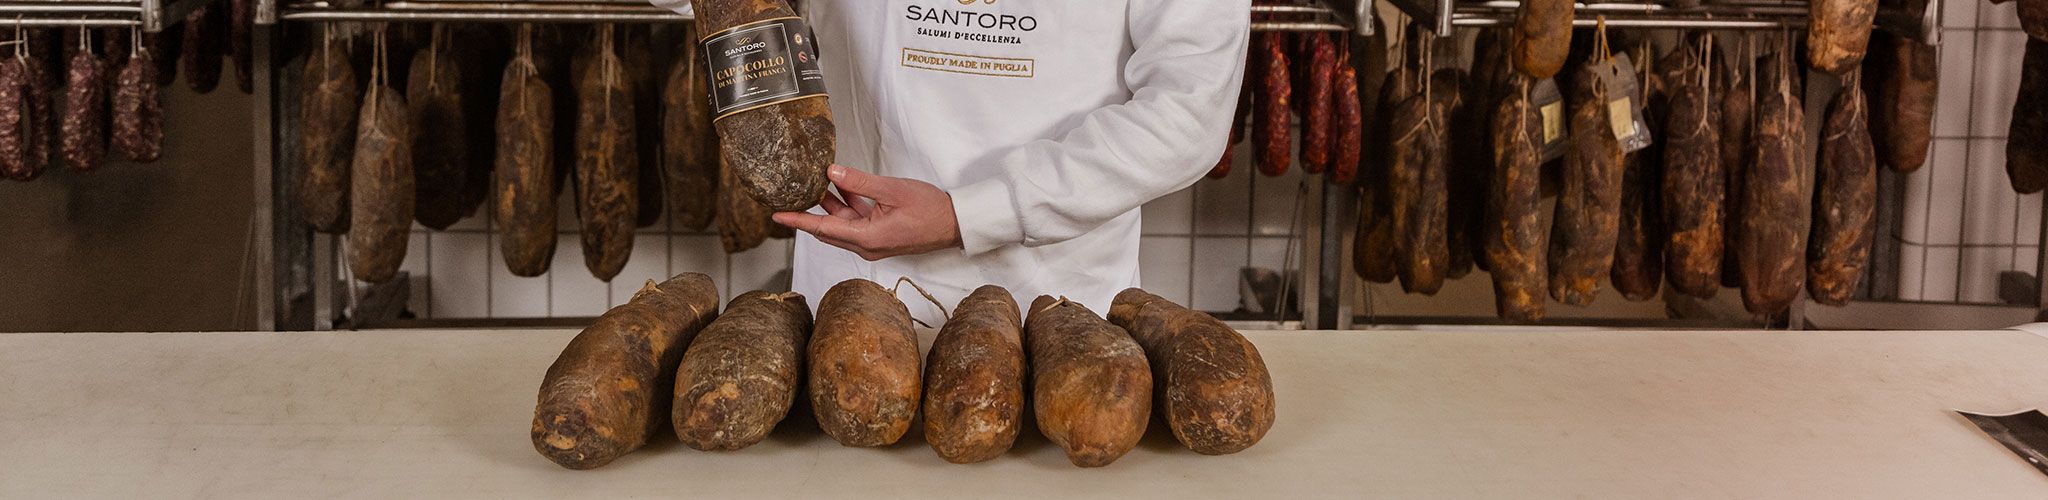 Hanged Santoro salami ready for the online sale and Capocollo in a worker's hands